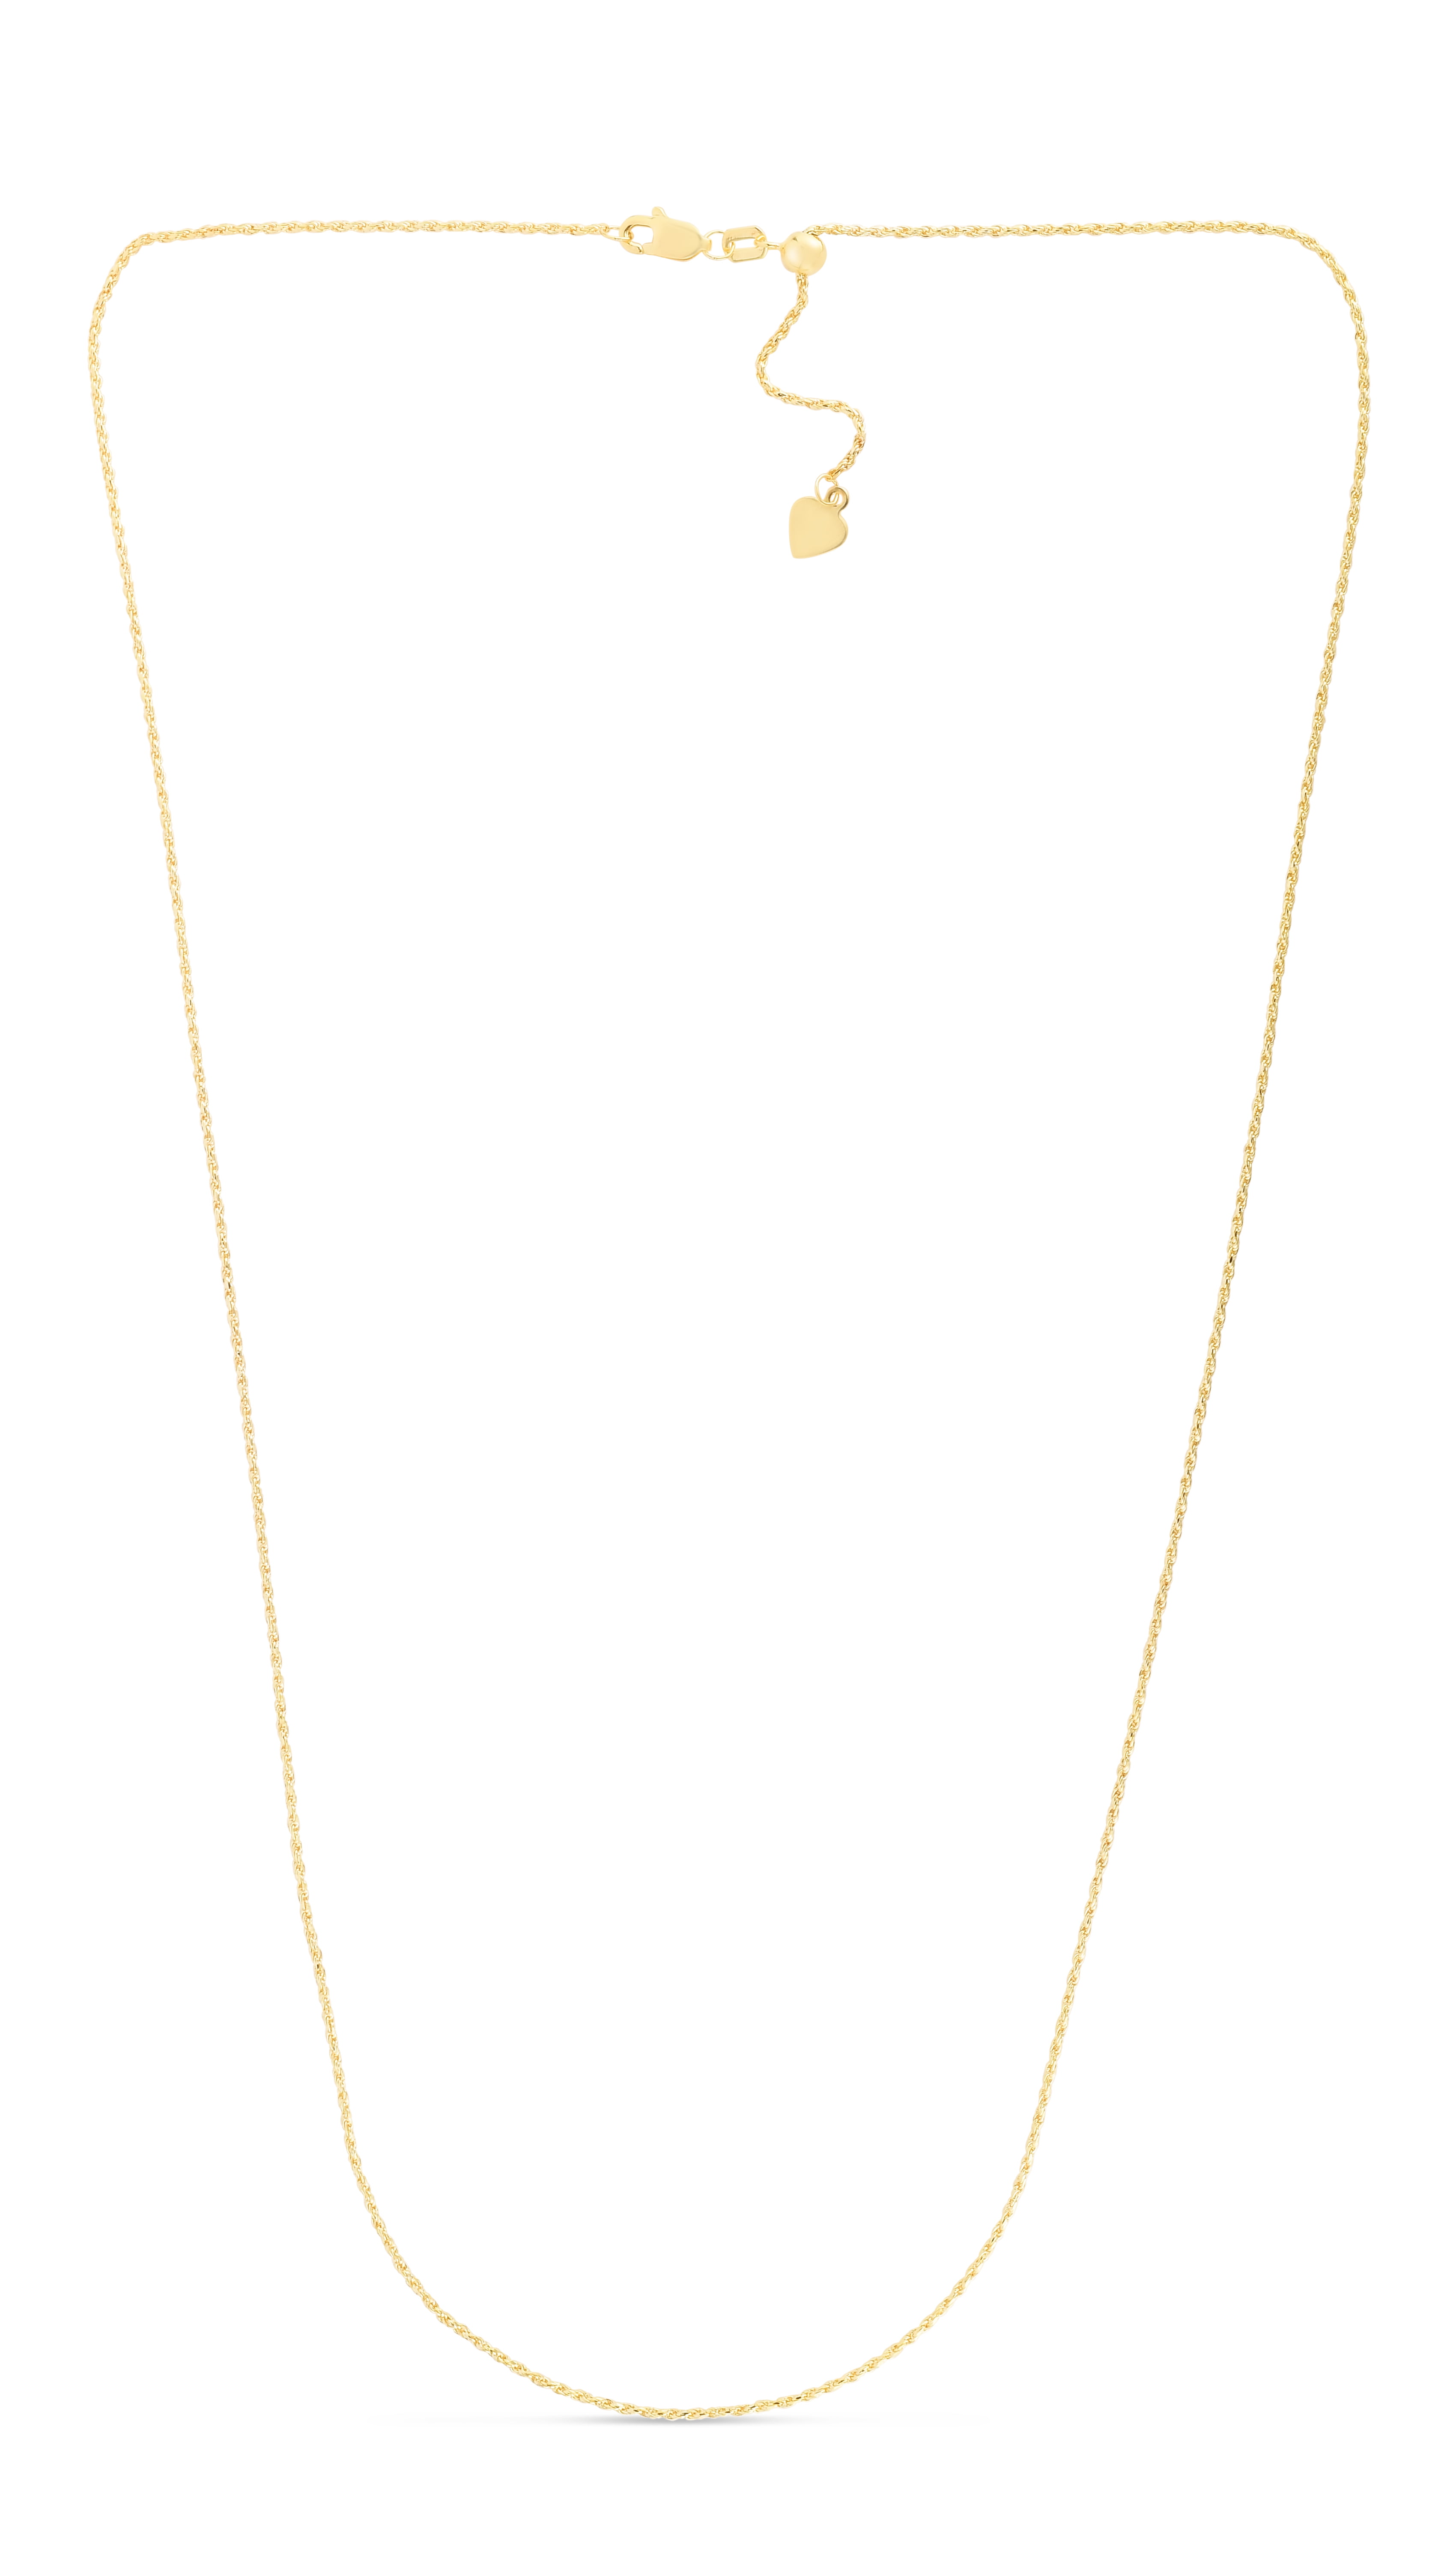 14K Yellow Gold Stingrays Pendant on an Adjustable 14K Yellow Gold Chain Necklace